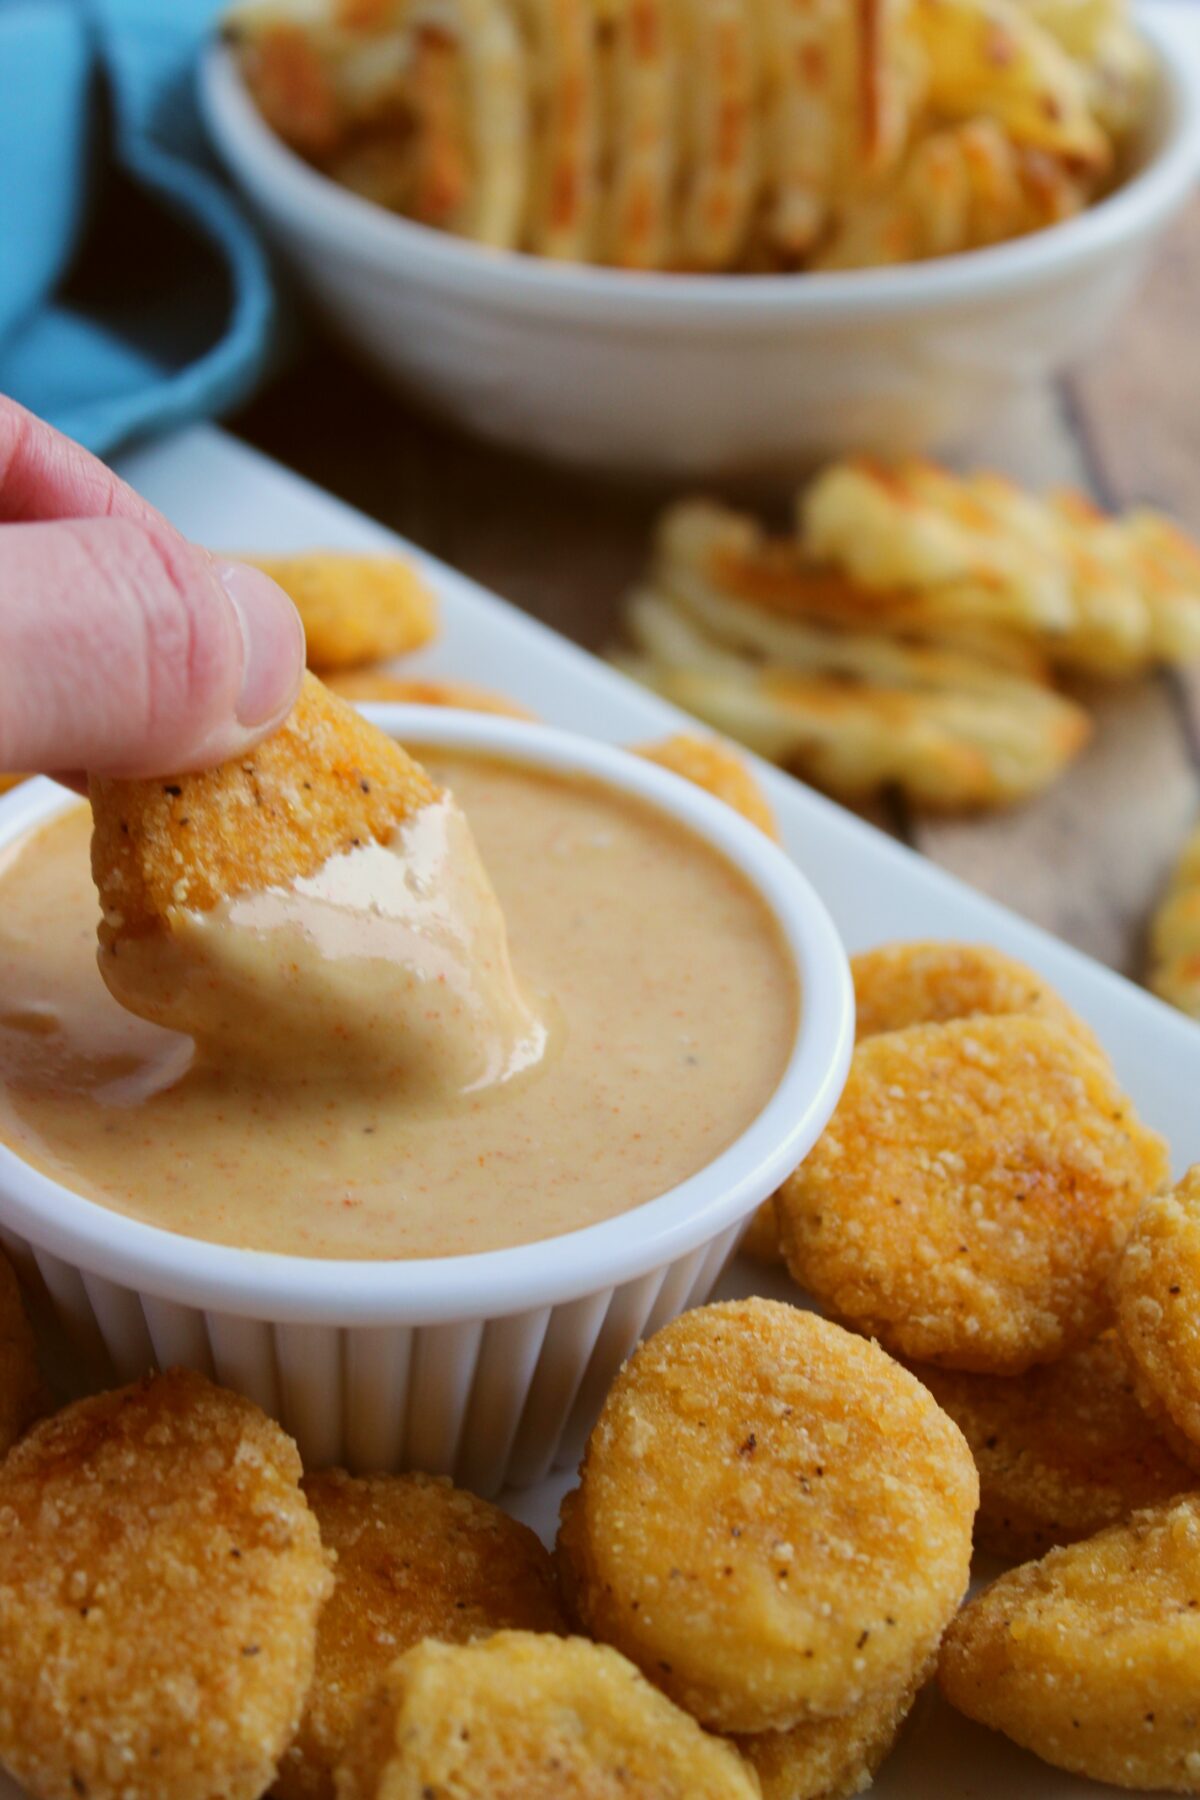 Discover our flavour-packed take on the iconic Chick-Fil-A Sauce. Perfect for food enthusiasts and fans alike, it's easier than you think!